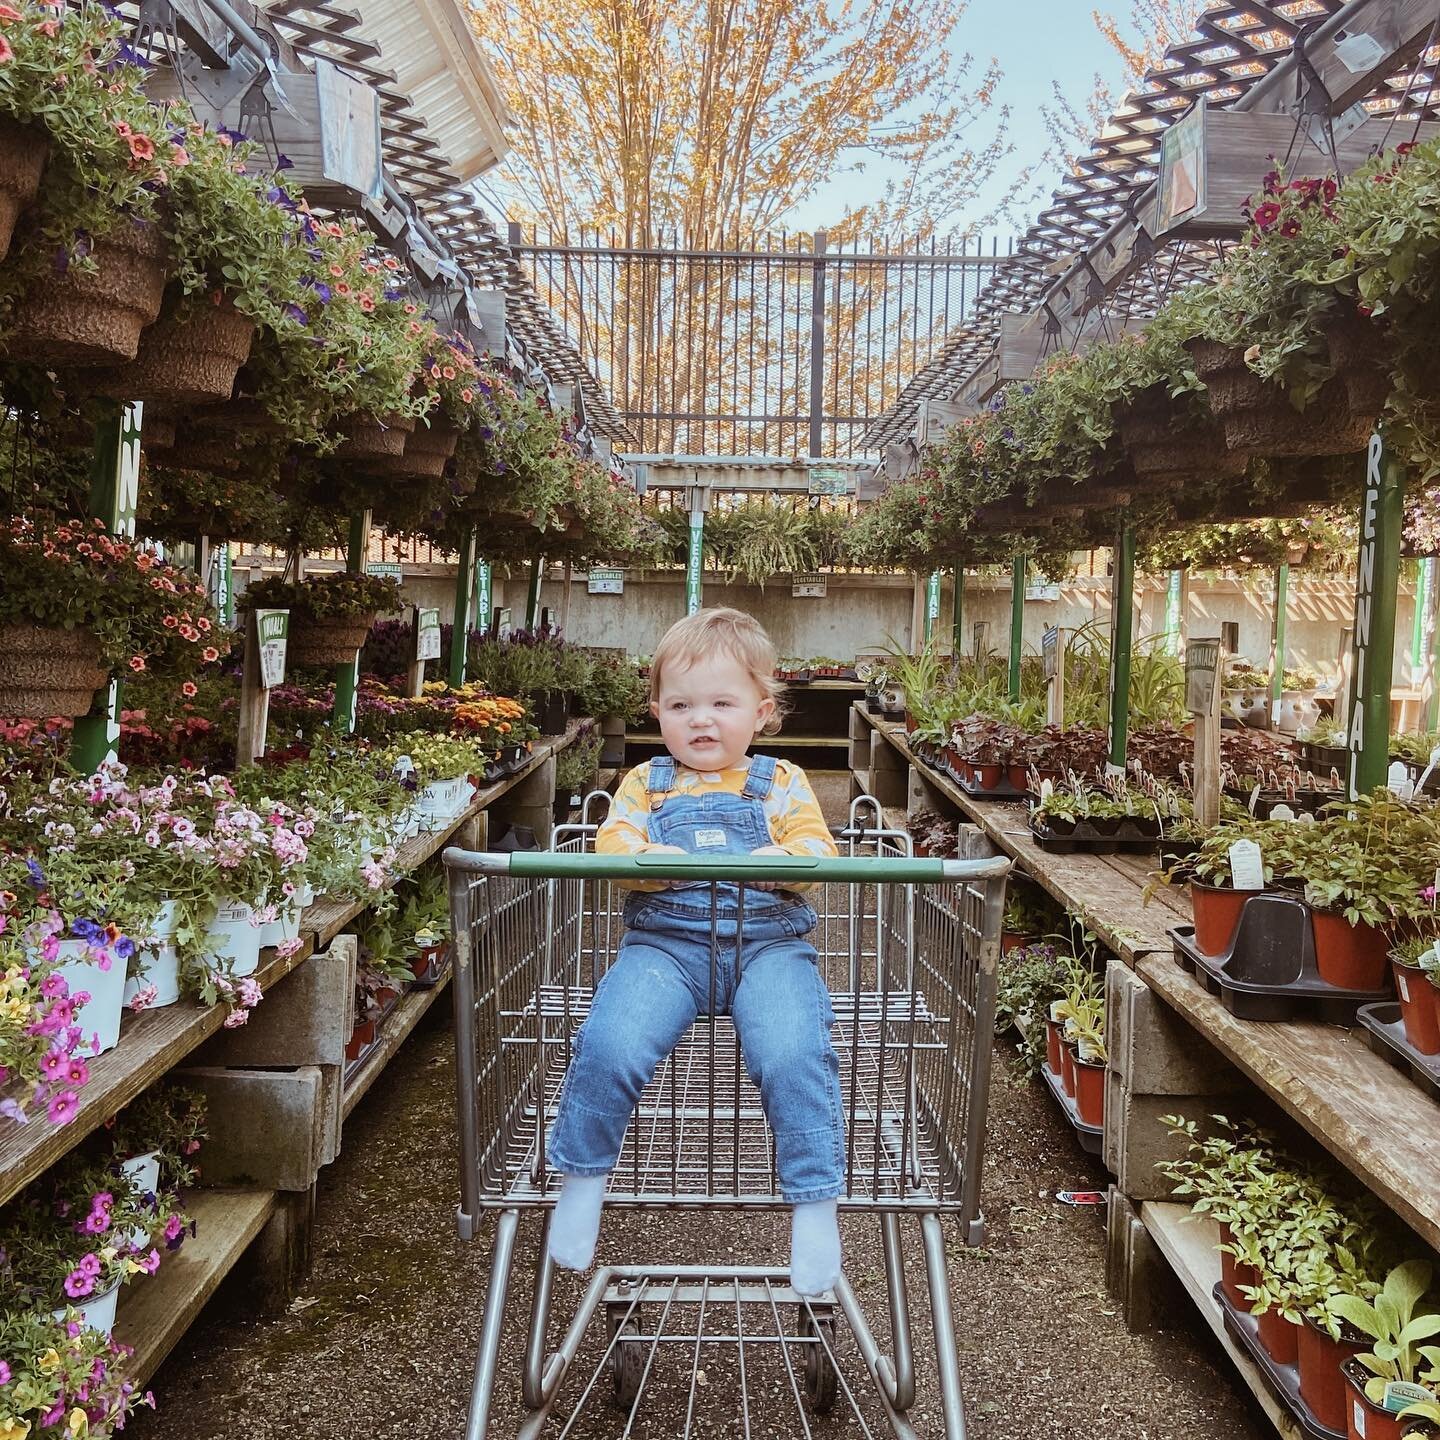 Doesn&rsquo;t get much better than toddlers in overalls, sunshine, and the Menard&rsquo;s garden center on a Sunday. Glorious.🌸🌱☀️🌺🪴